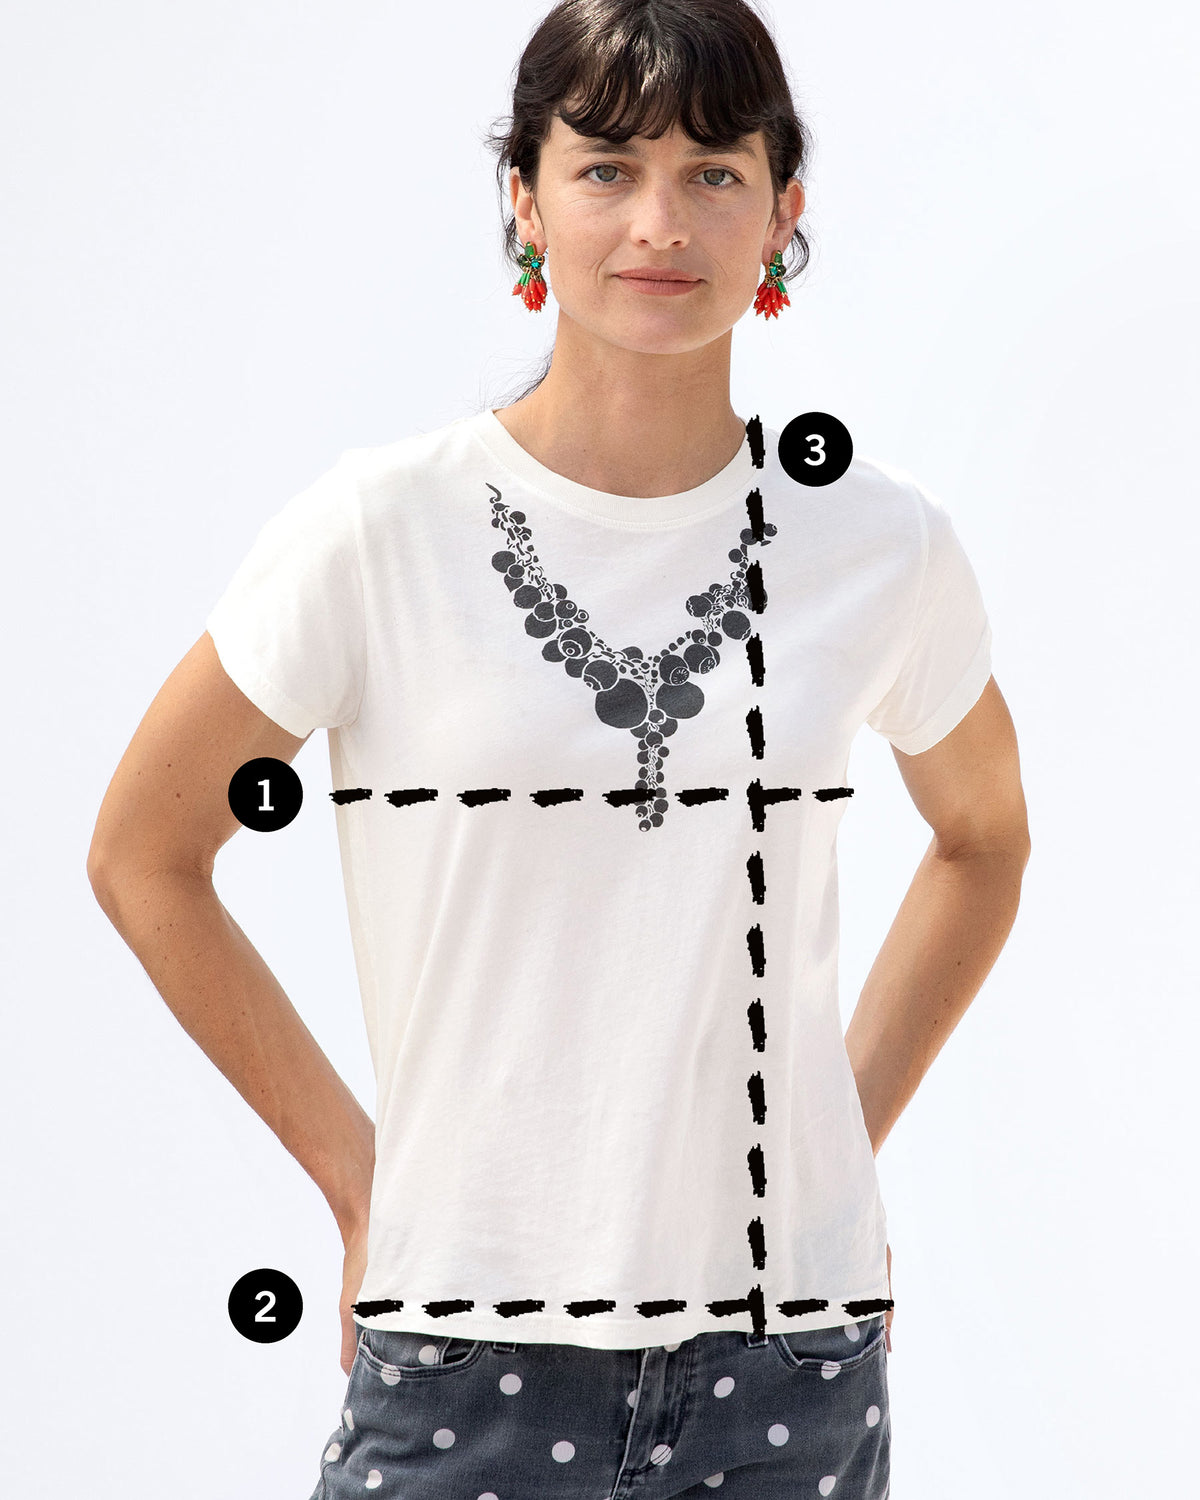 Danica wearing a tee shirt with detailed lines to demonstrate how to measure our apparel